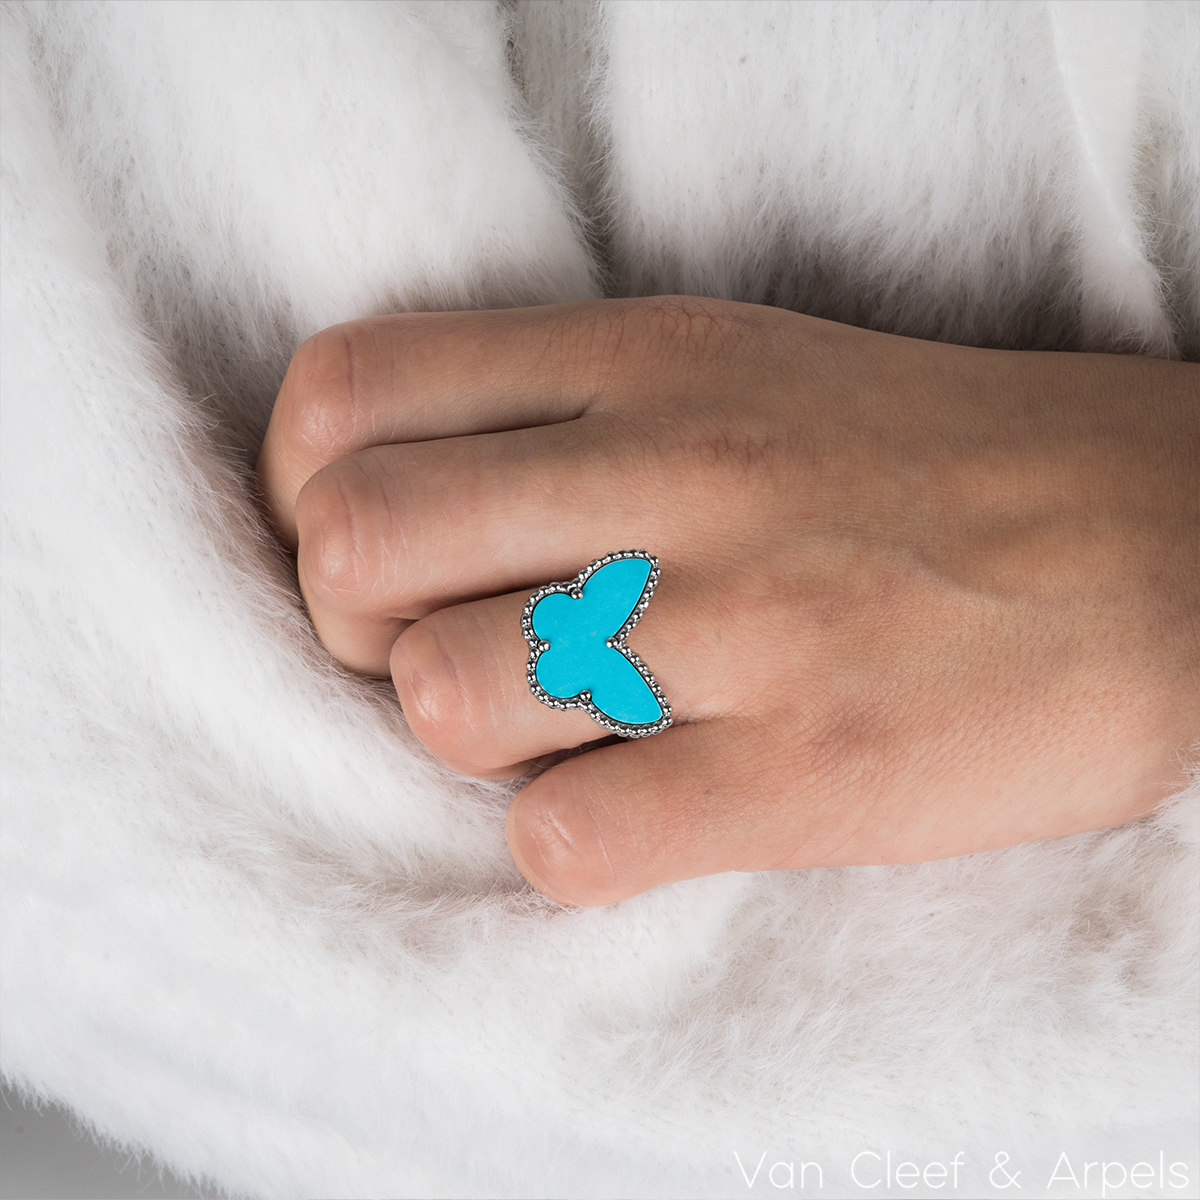 Van Cleef & Arpels White Gold Turquoise Lucky Alhambra Butterfly Ring